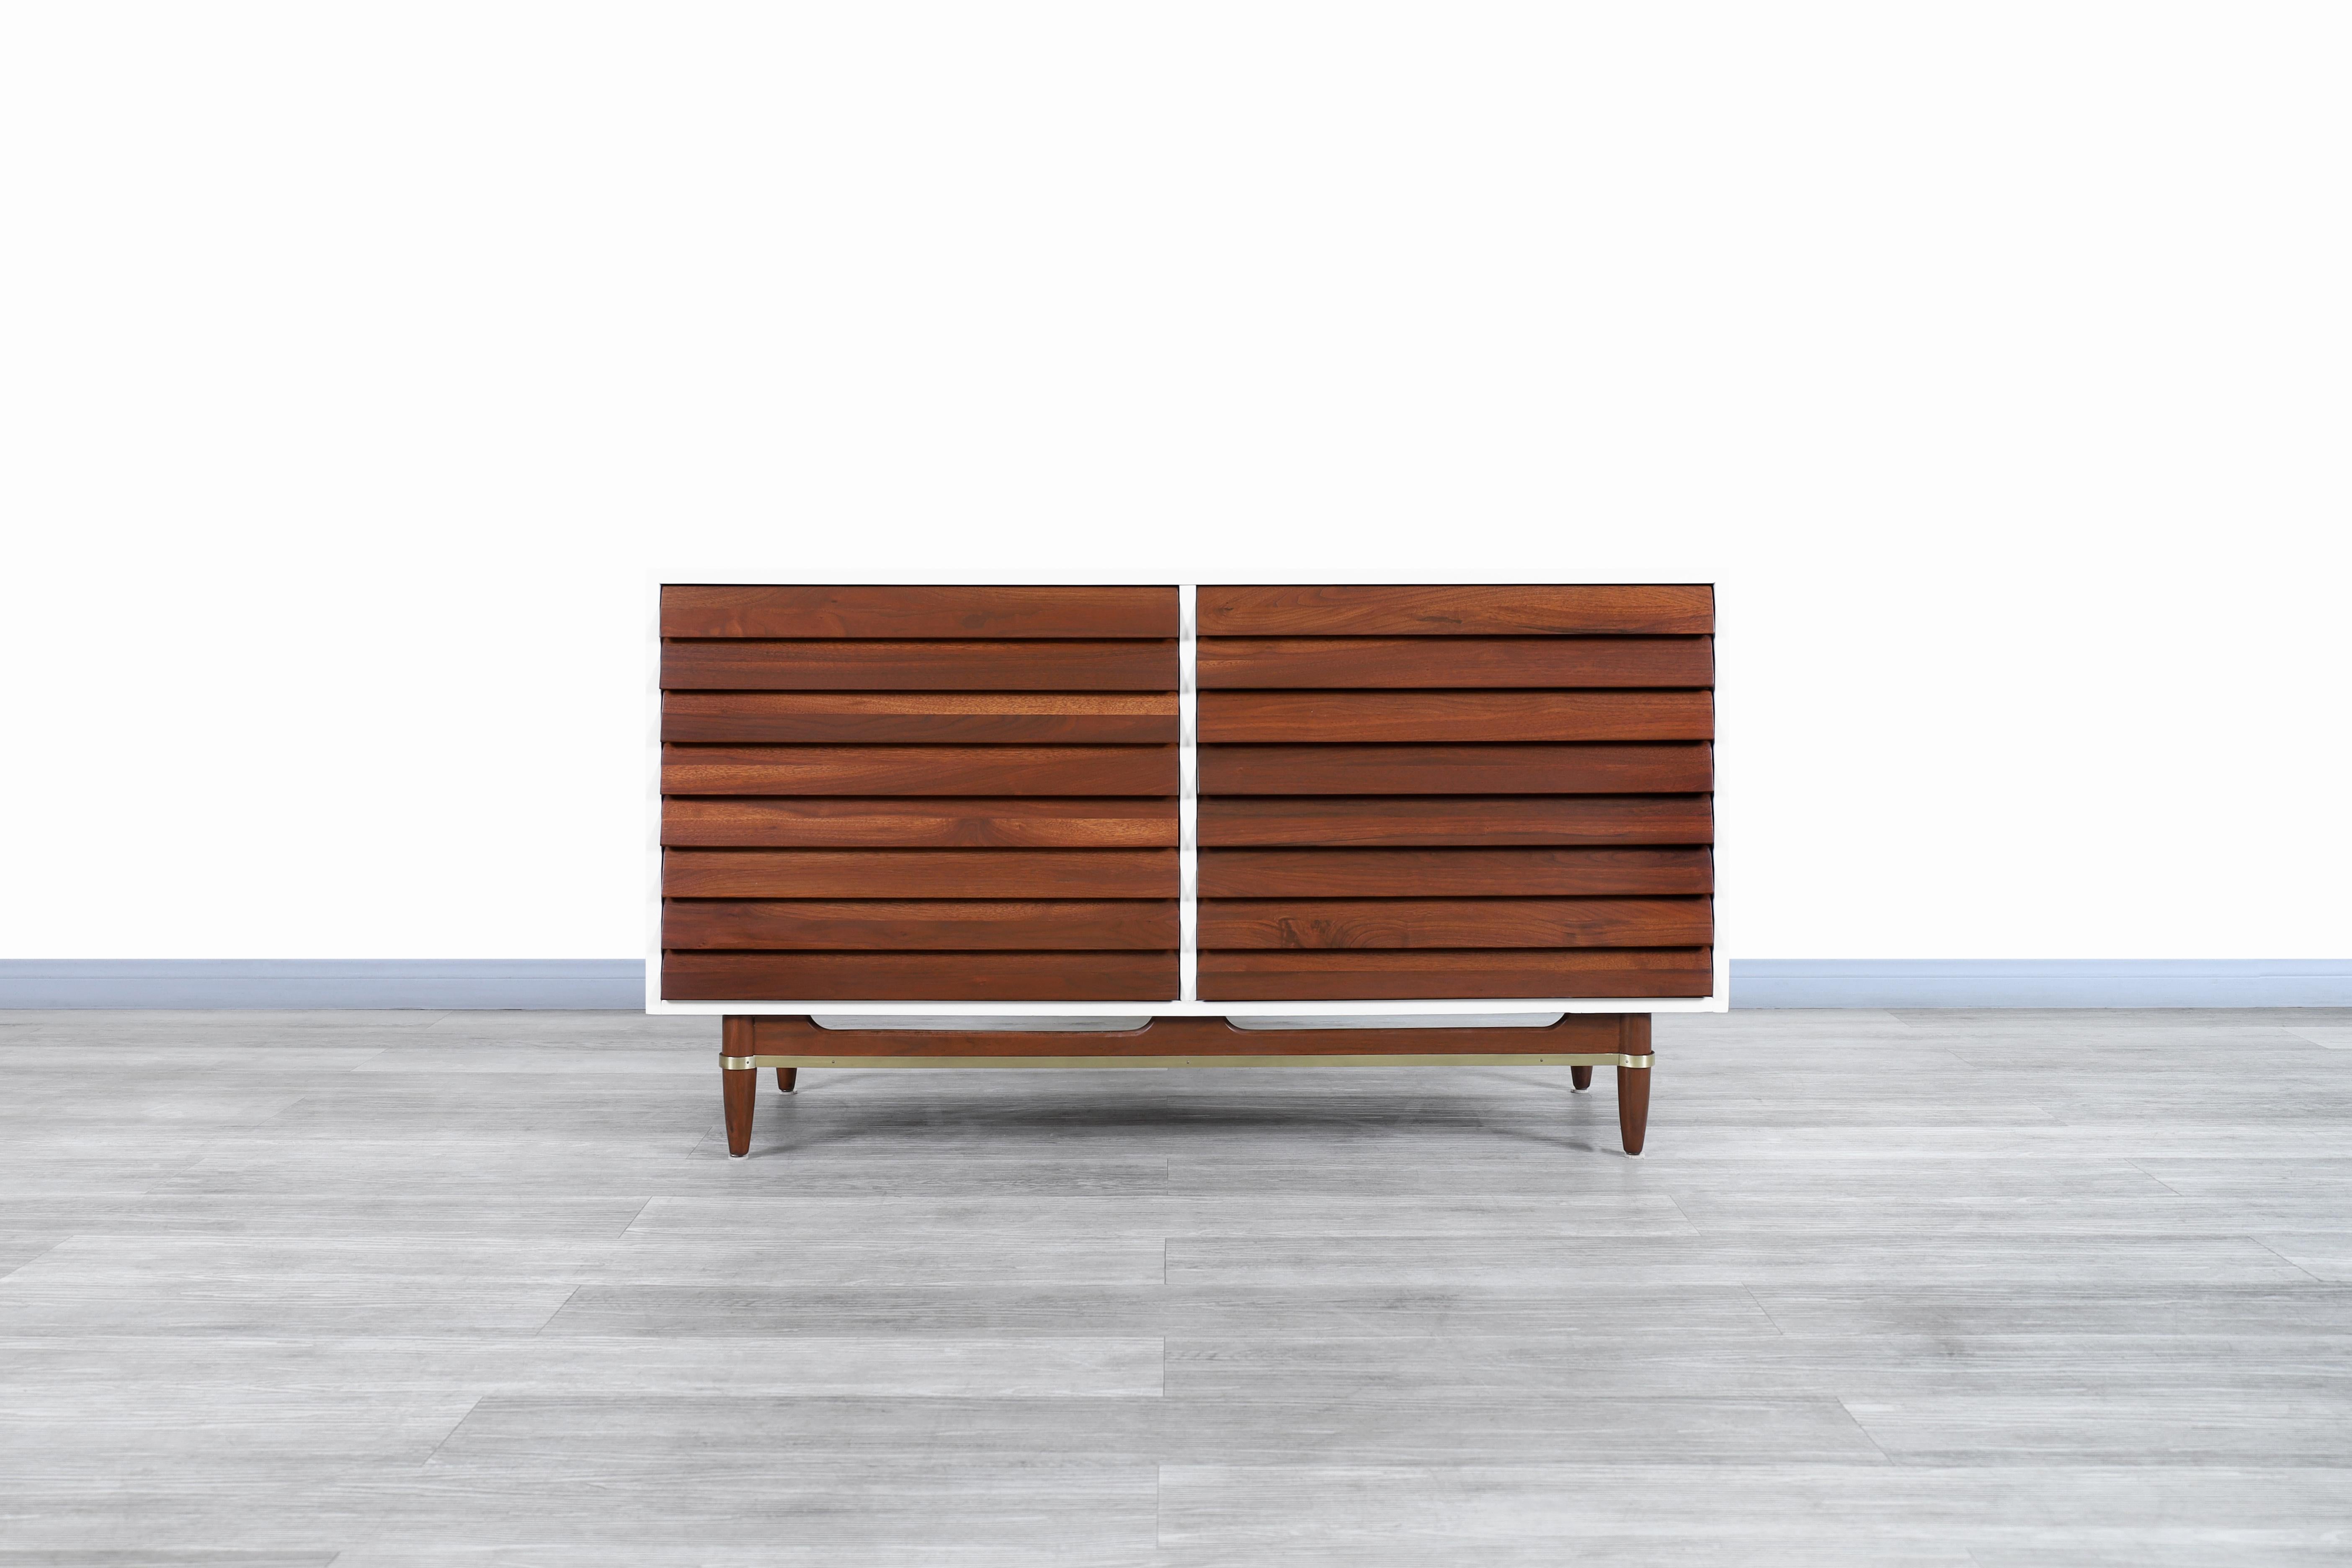 Fabulous mid century walnut and lacquered dresser designed by Michael L. Gershun for American of Martinsville in the United States, circa 1960s. This credenza has been constructed from the highest quality walnut wood. Features a white lacquered box